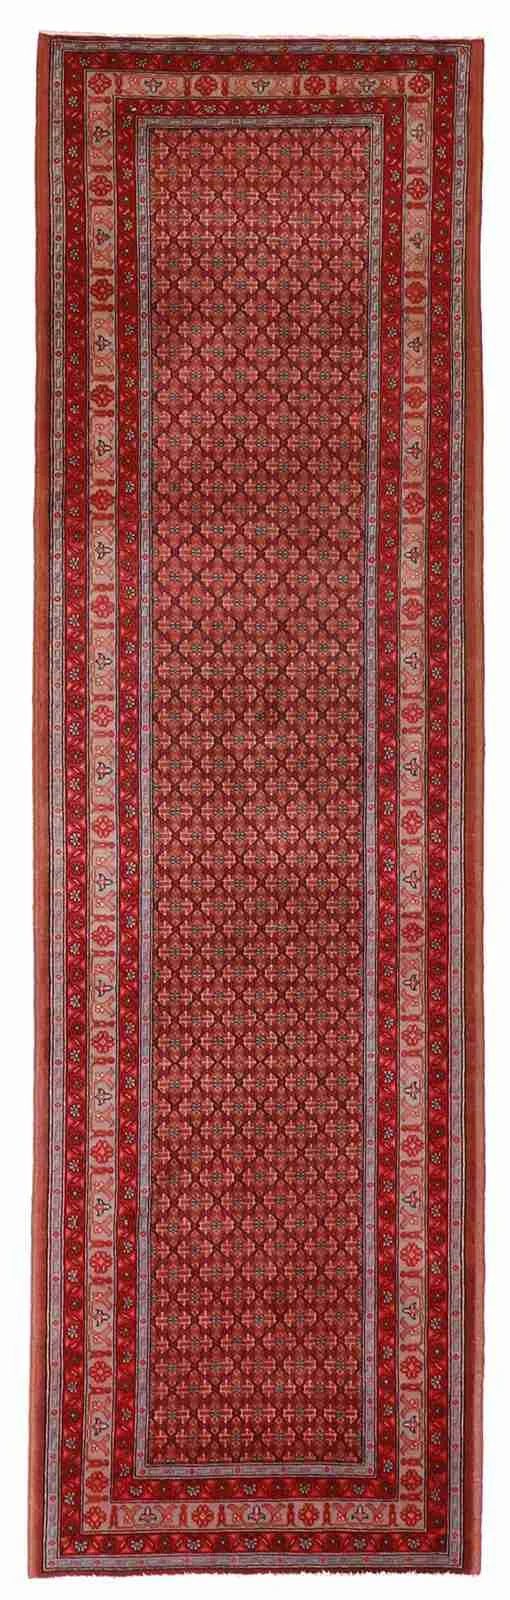 Runner - Afshar Fine/Wool Geometric Rectangle - Hand Knotted Rug